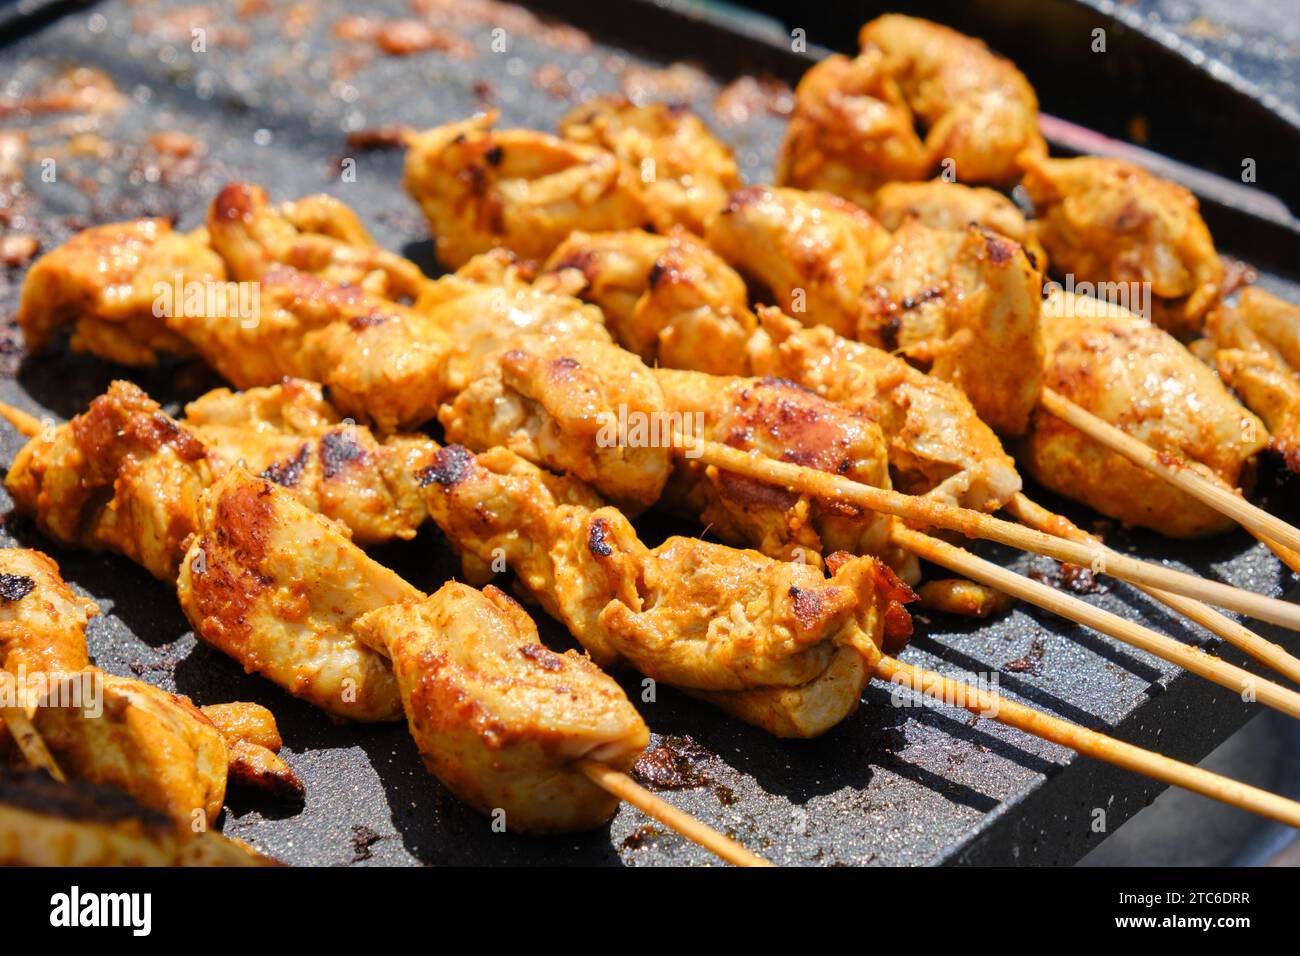 stacked skewers of chicken marinated kebab on a hot plate of food stand Stock Photo